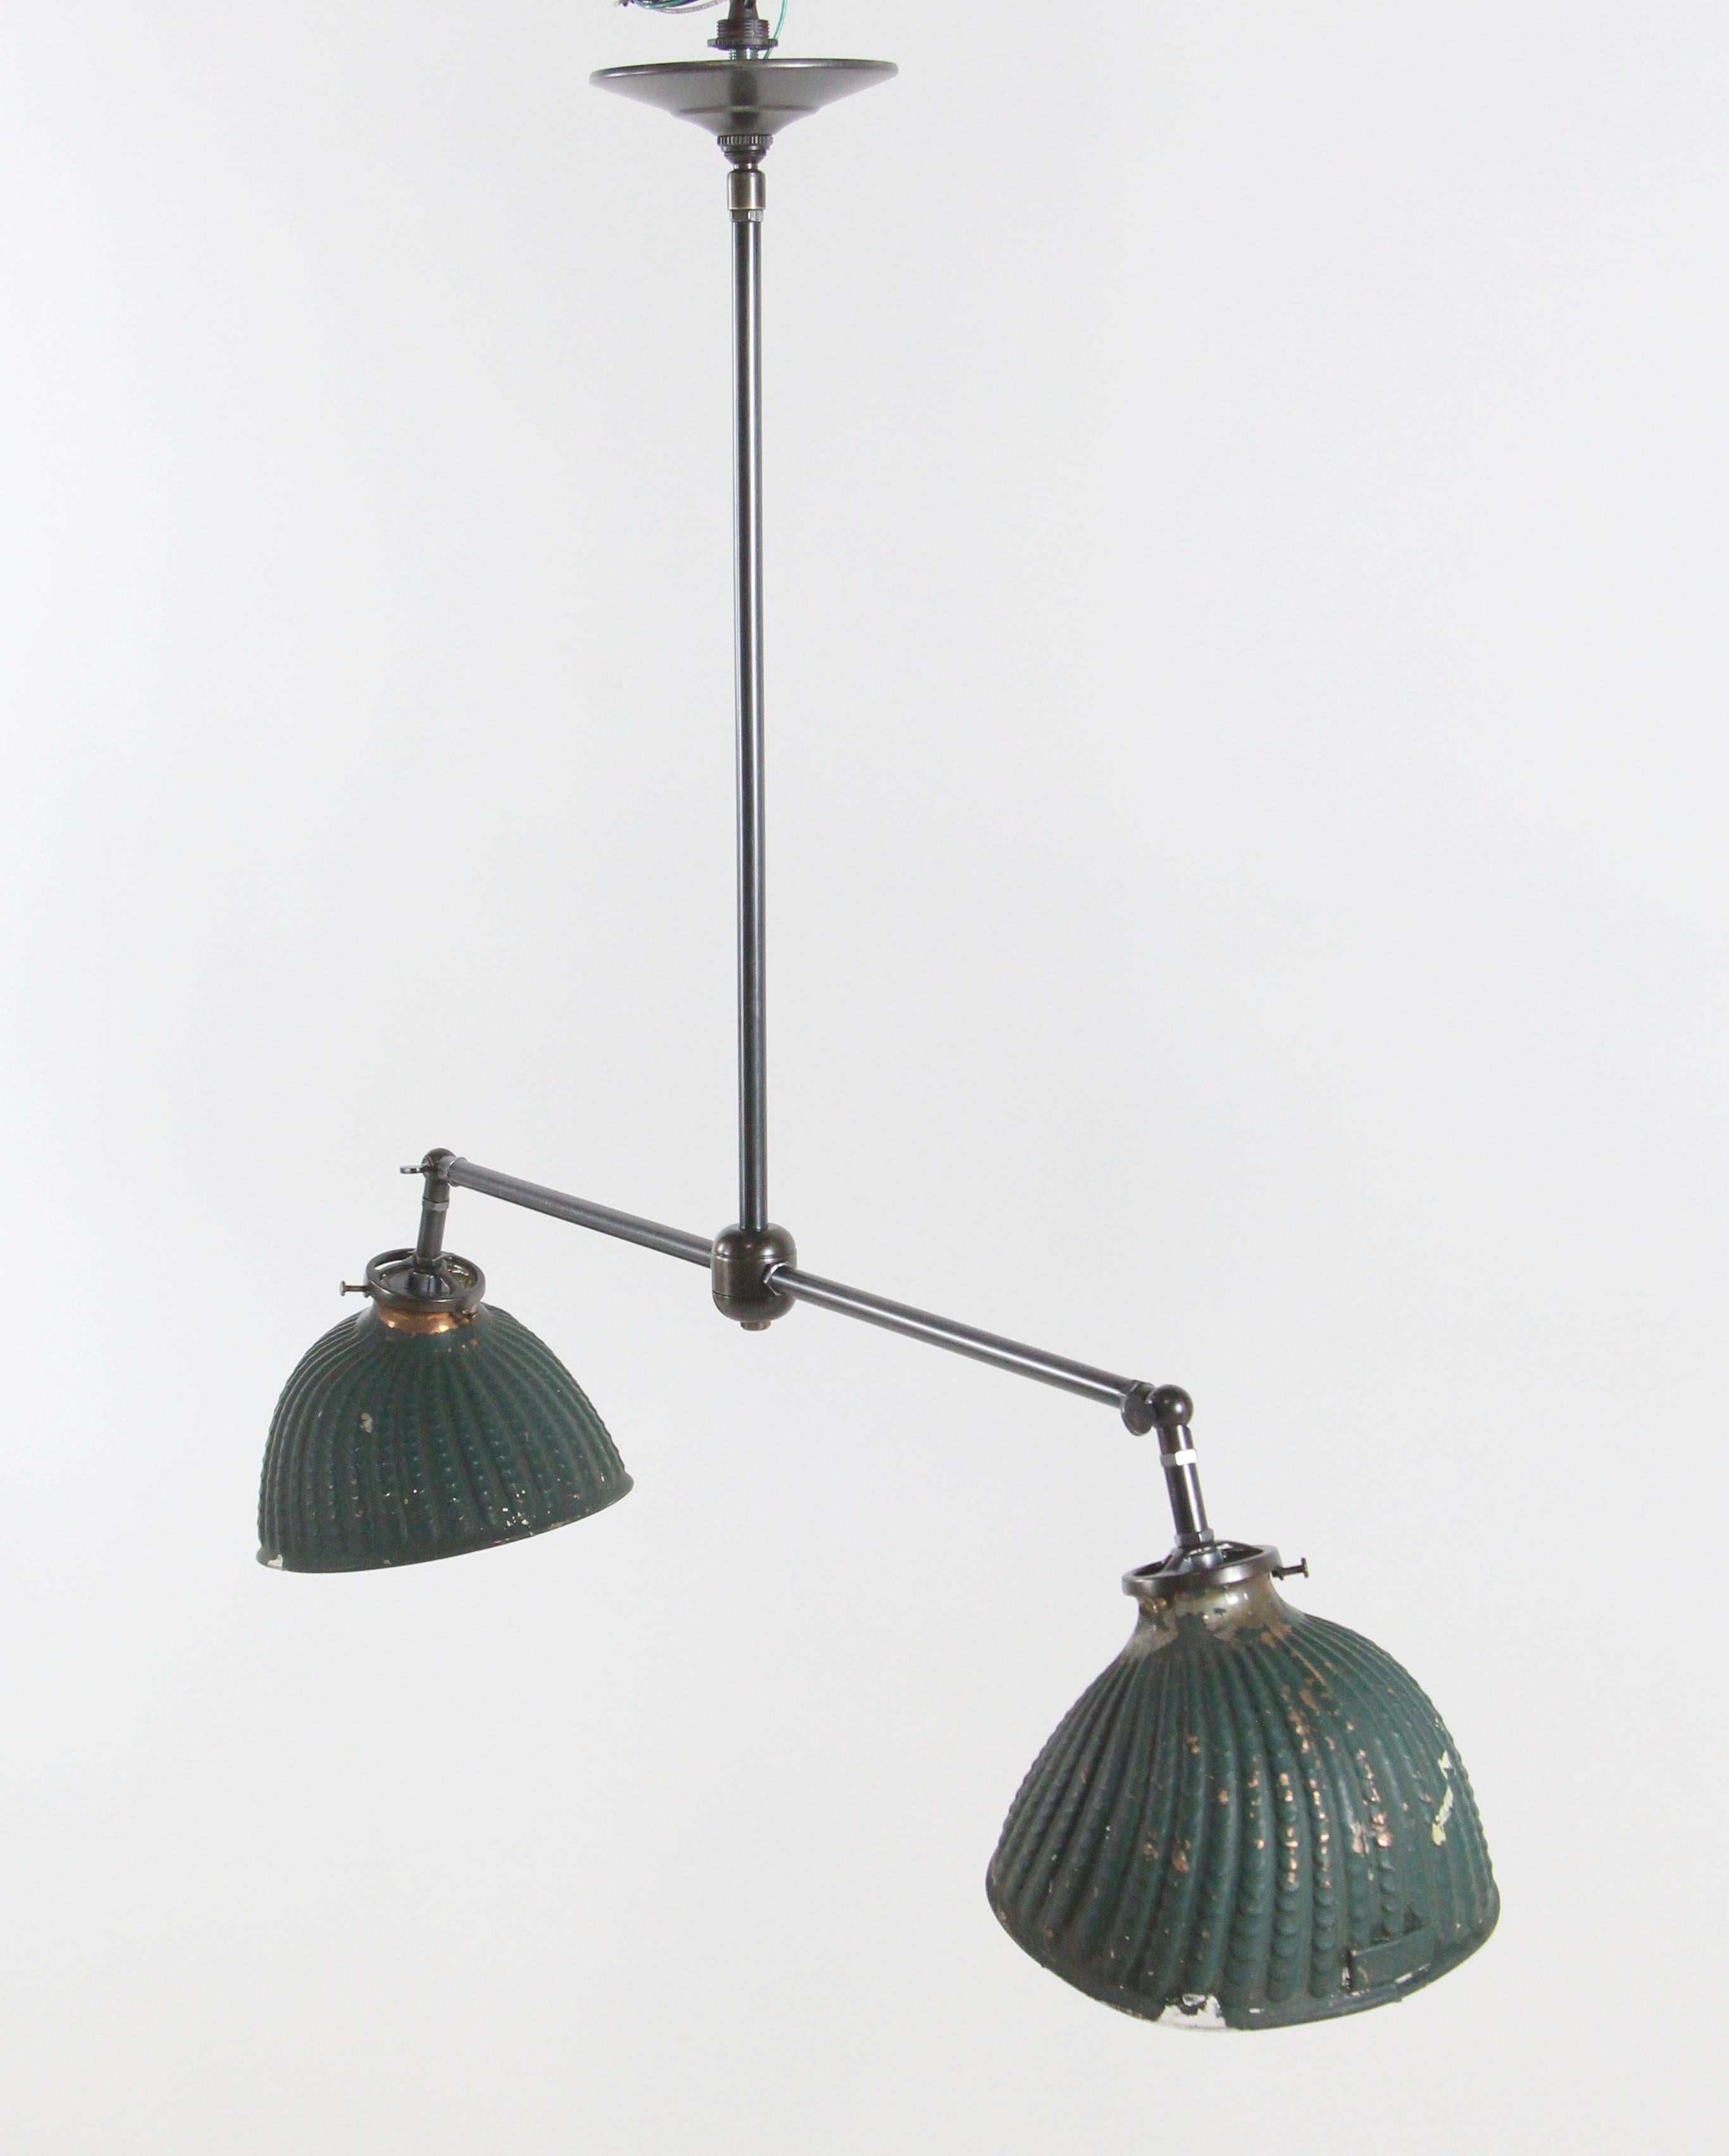 New modern brass double pendant light fixture with original 1920s green rippled X-ray glass shades. The insides of the shades are silvered glass. The arms are adjustable so that the shades can be set at the angle desired. Price includes restoration.